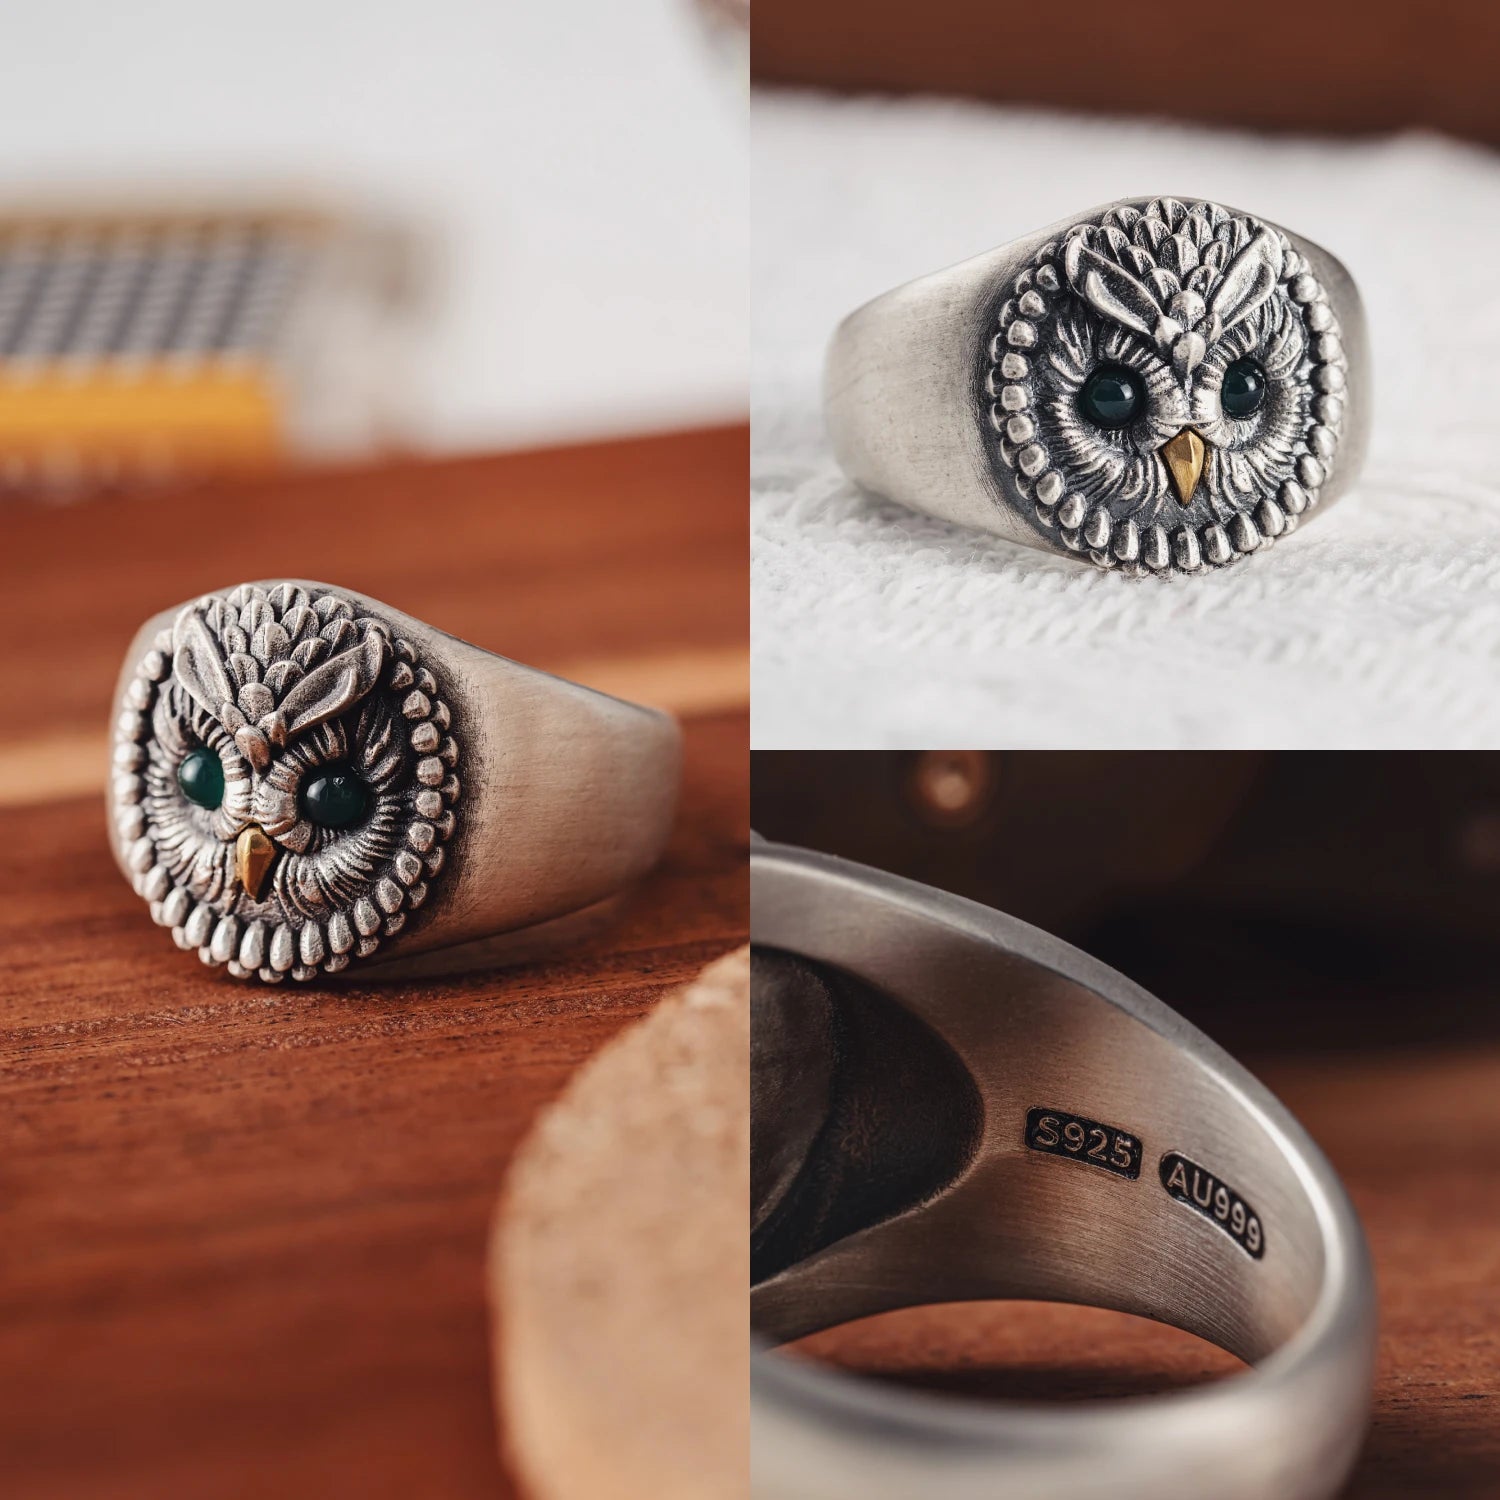 Silver Owl Ring 925 Sterling Silver Jewelry Handmade Unisex Ring Size 8 |  eBay